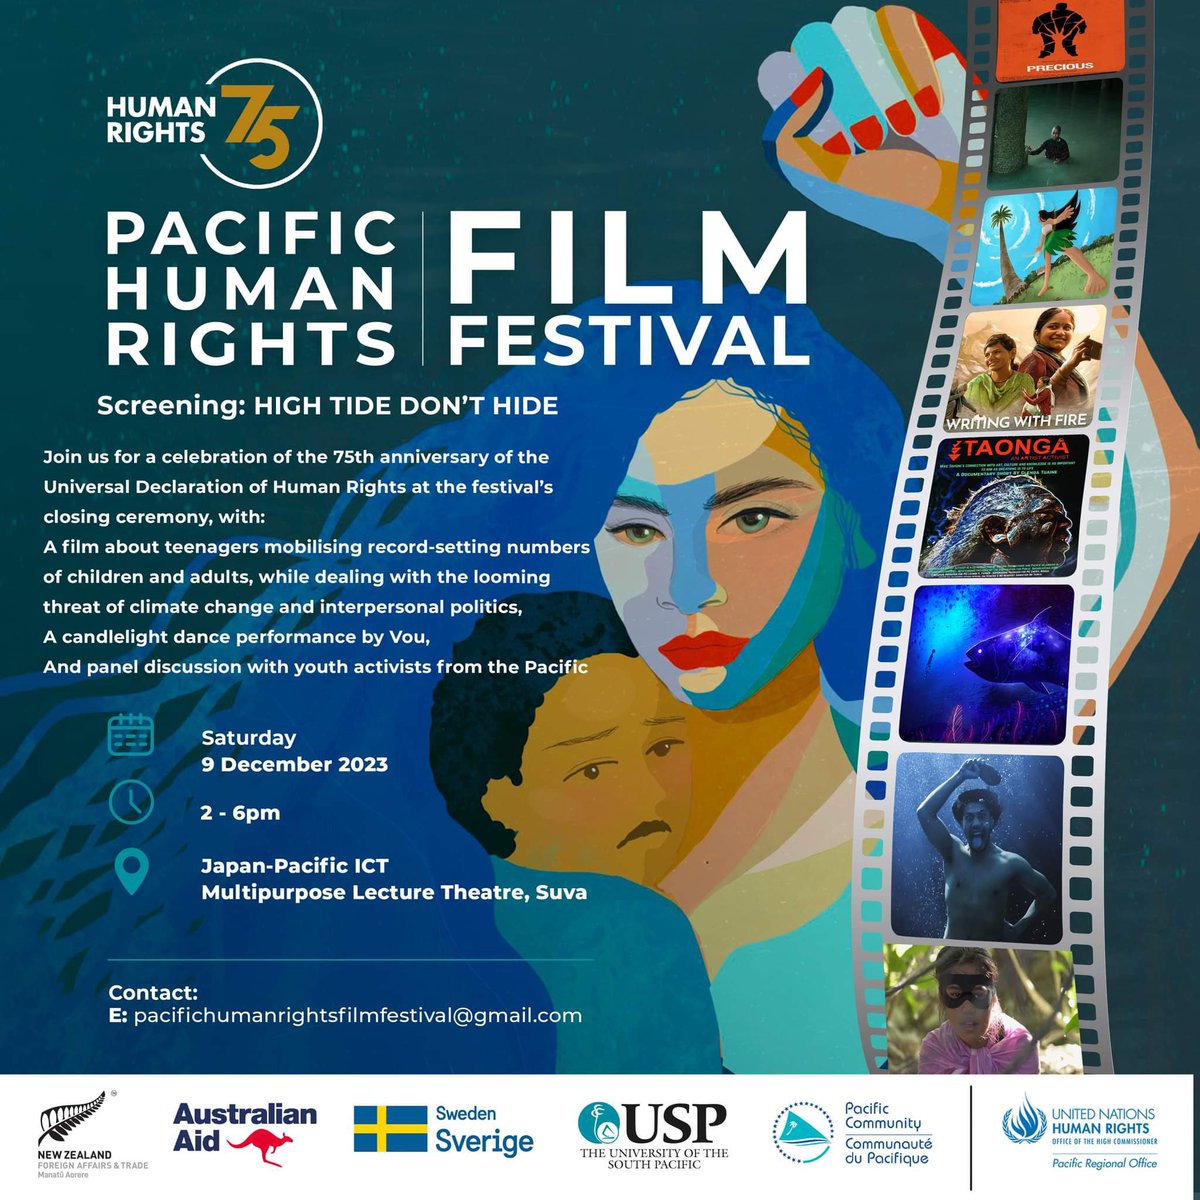 #PacificHumanRightsFilmFestival:⌛️5 more days – we count down to the 75th anniversary celebration of the Universal Declaration of Human Rights. VOU dance group & film on Pacific youth climate activism this Saturday at @UniSouthPacific. Free entry & open to everyone #HumanRights75